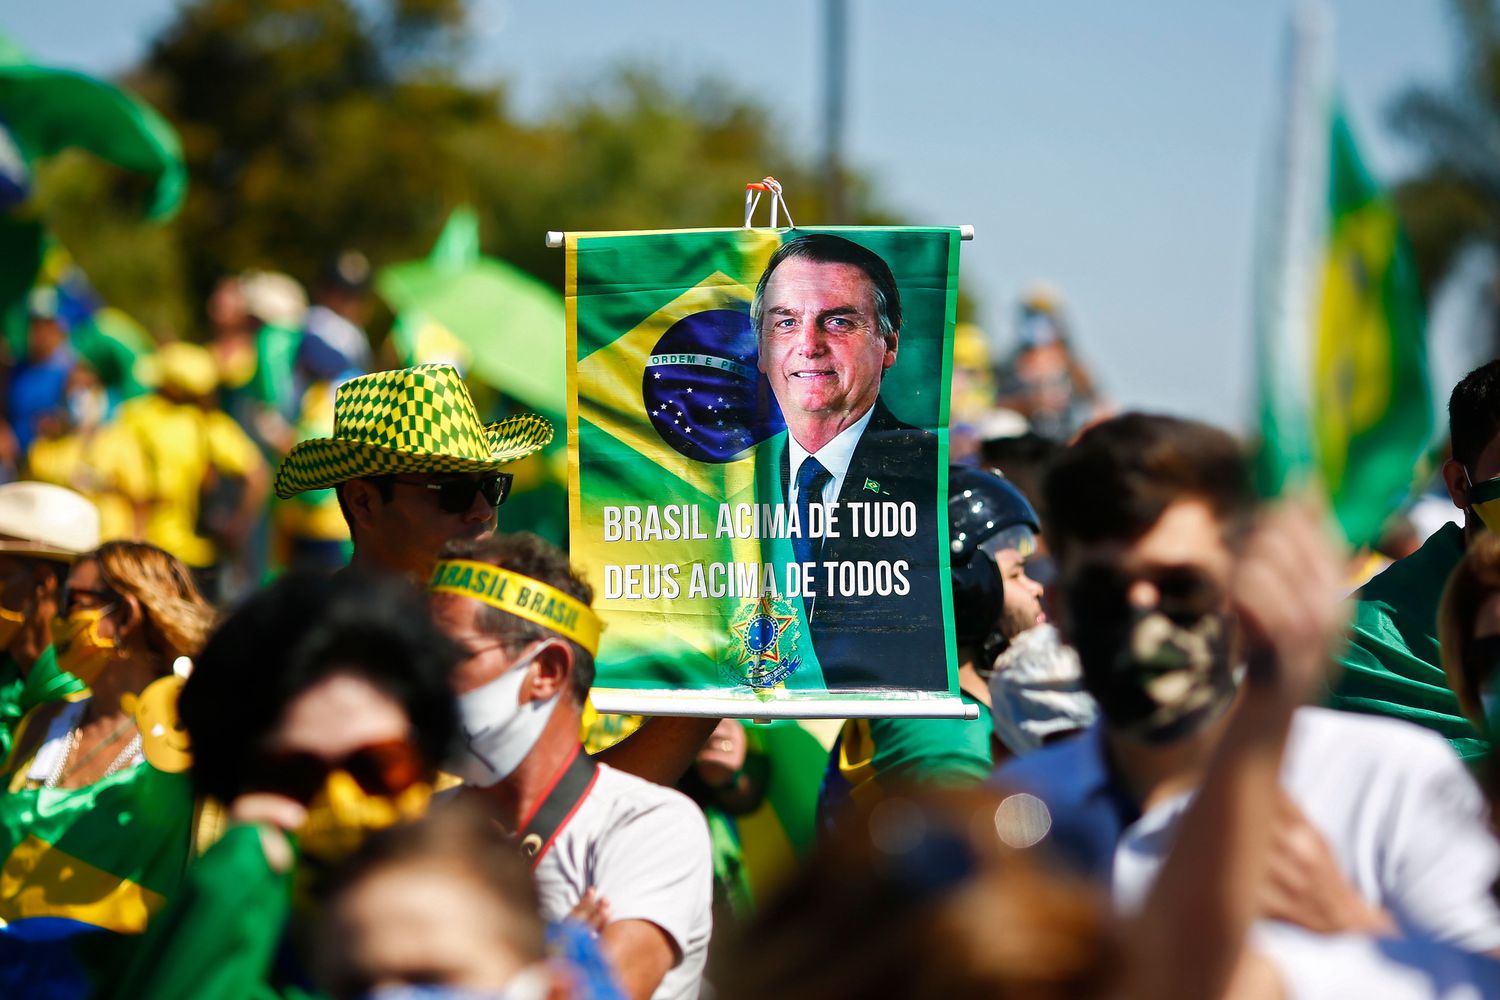 In recent years, the rise of far right-wing candidates throughout the world, Brazil included, has heightened people's distrust of democratic institutions.